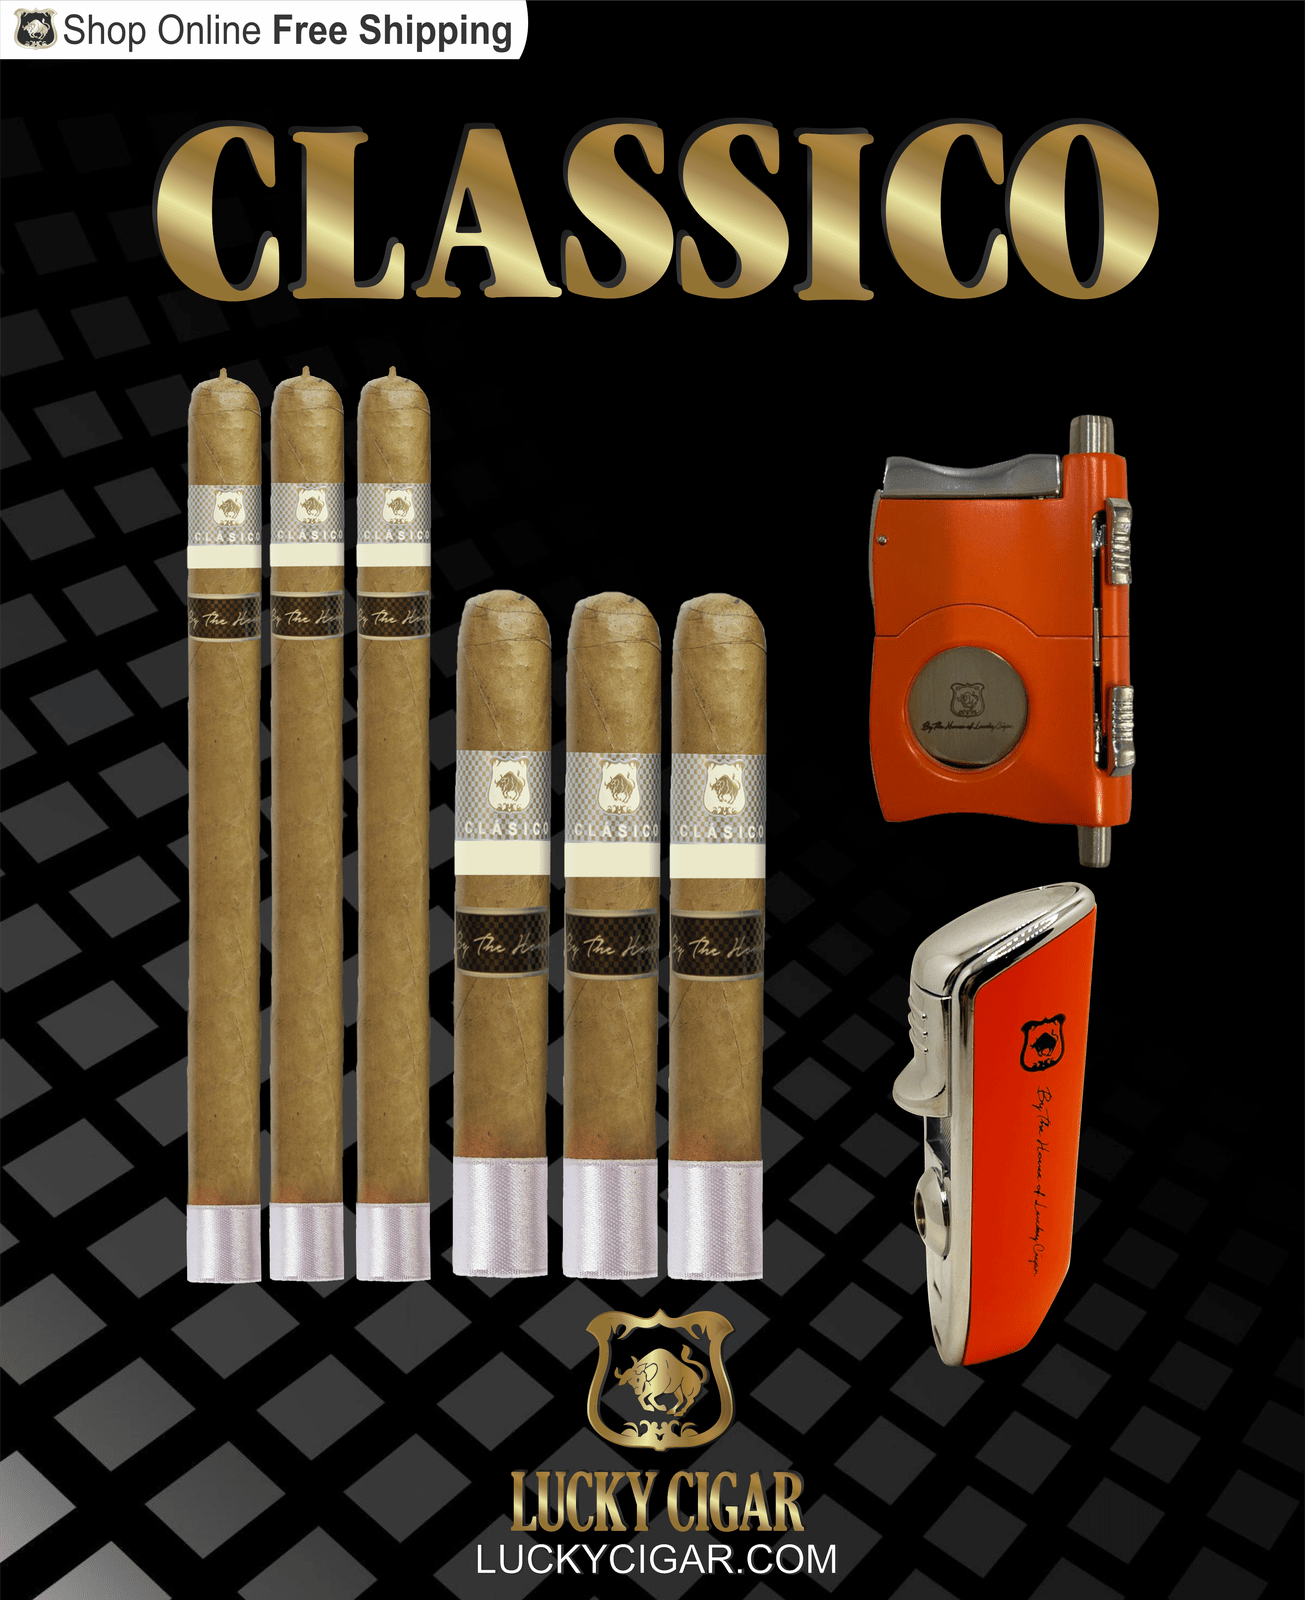 Lucky Cigar Sampler Sets: Set of 6 Classico Lancero, Robusto Cigars with Torch, Cutter, Puncher